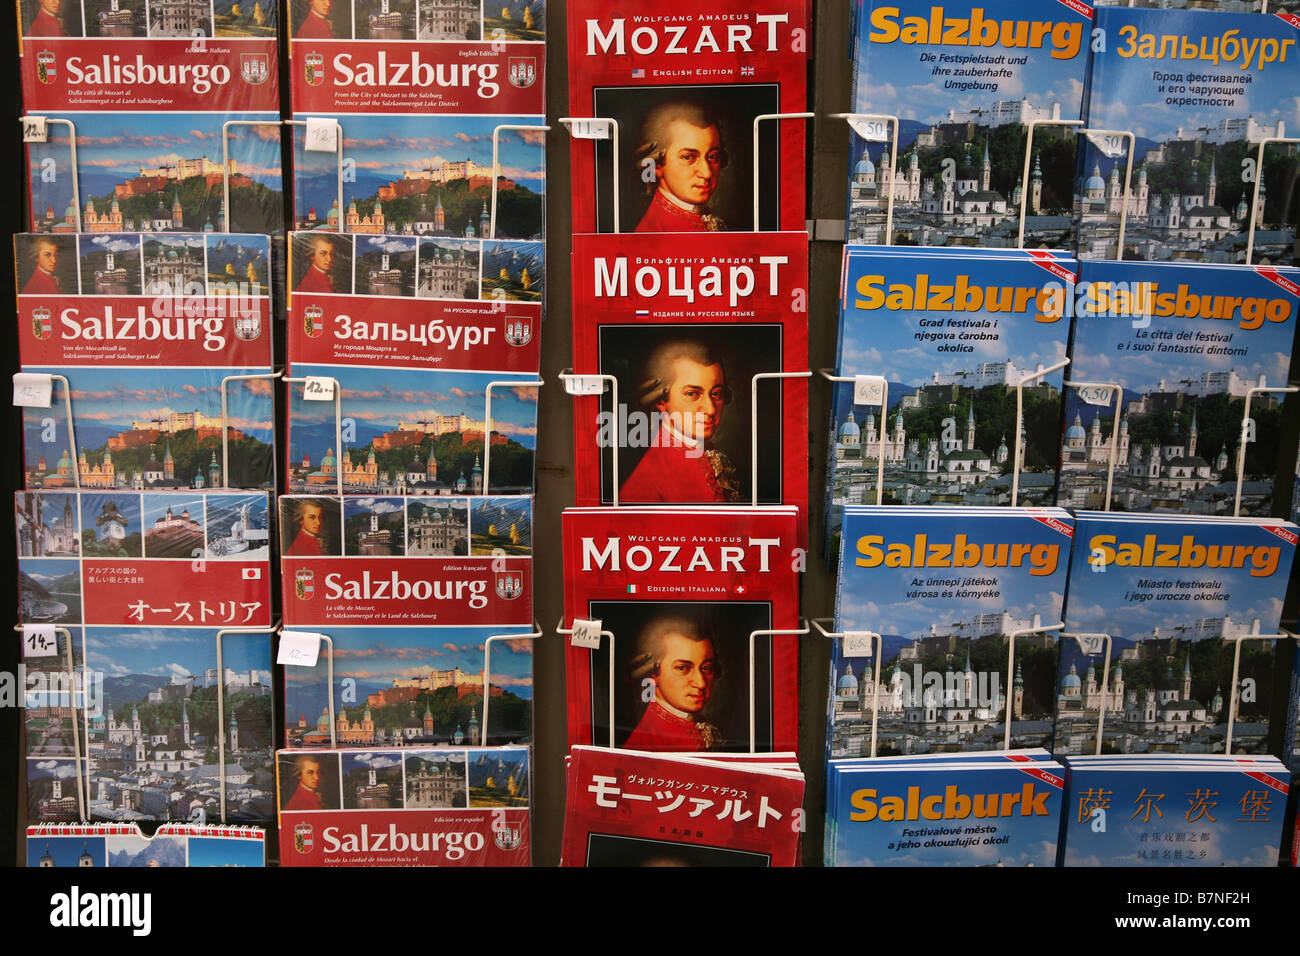 Guide books to Salzburg and books about Mozart in a souvenir shop in the historic centre of Salzburg, Austria. Stock Photo